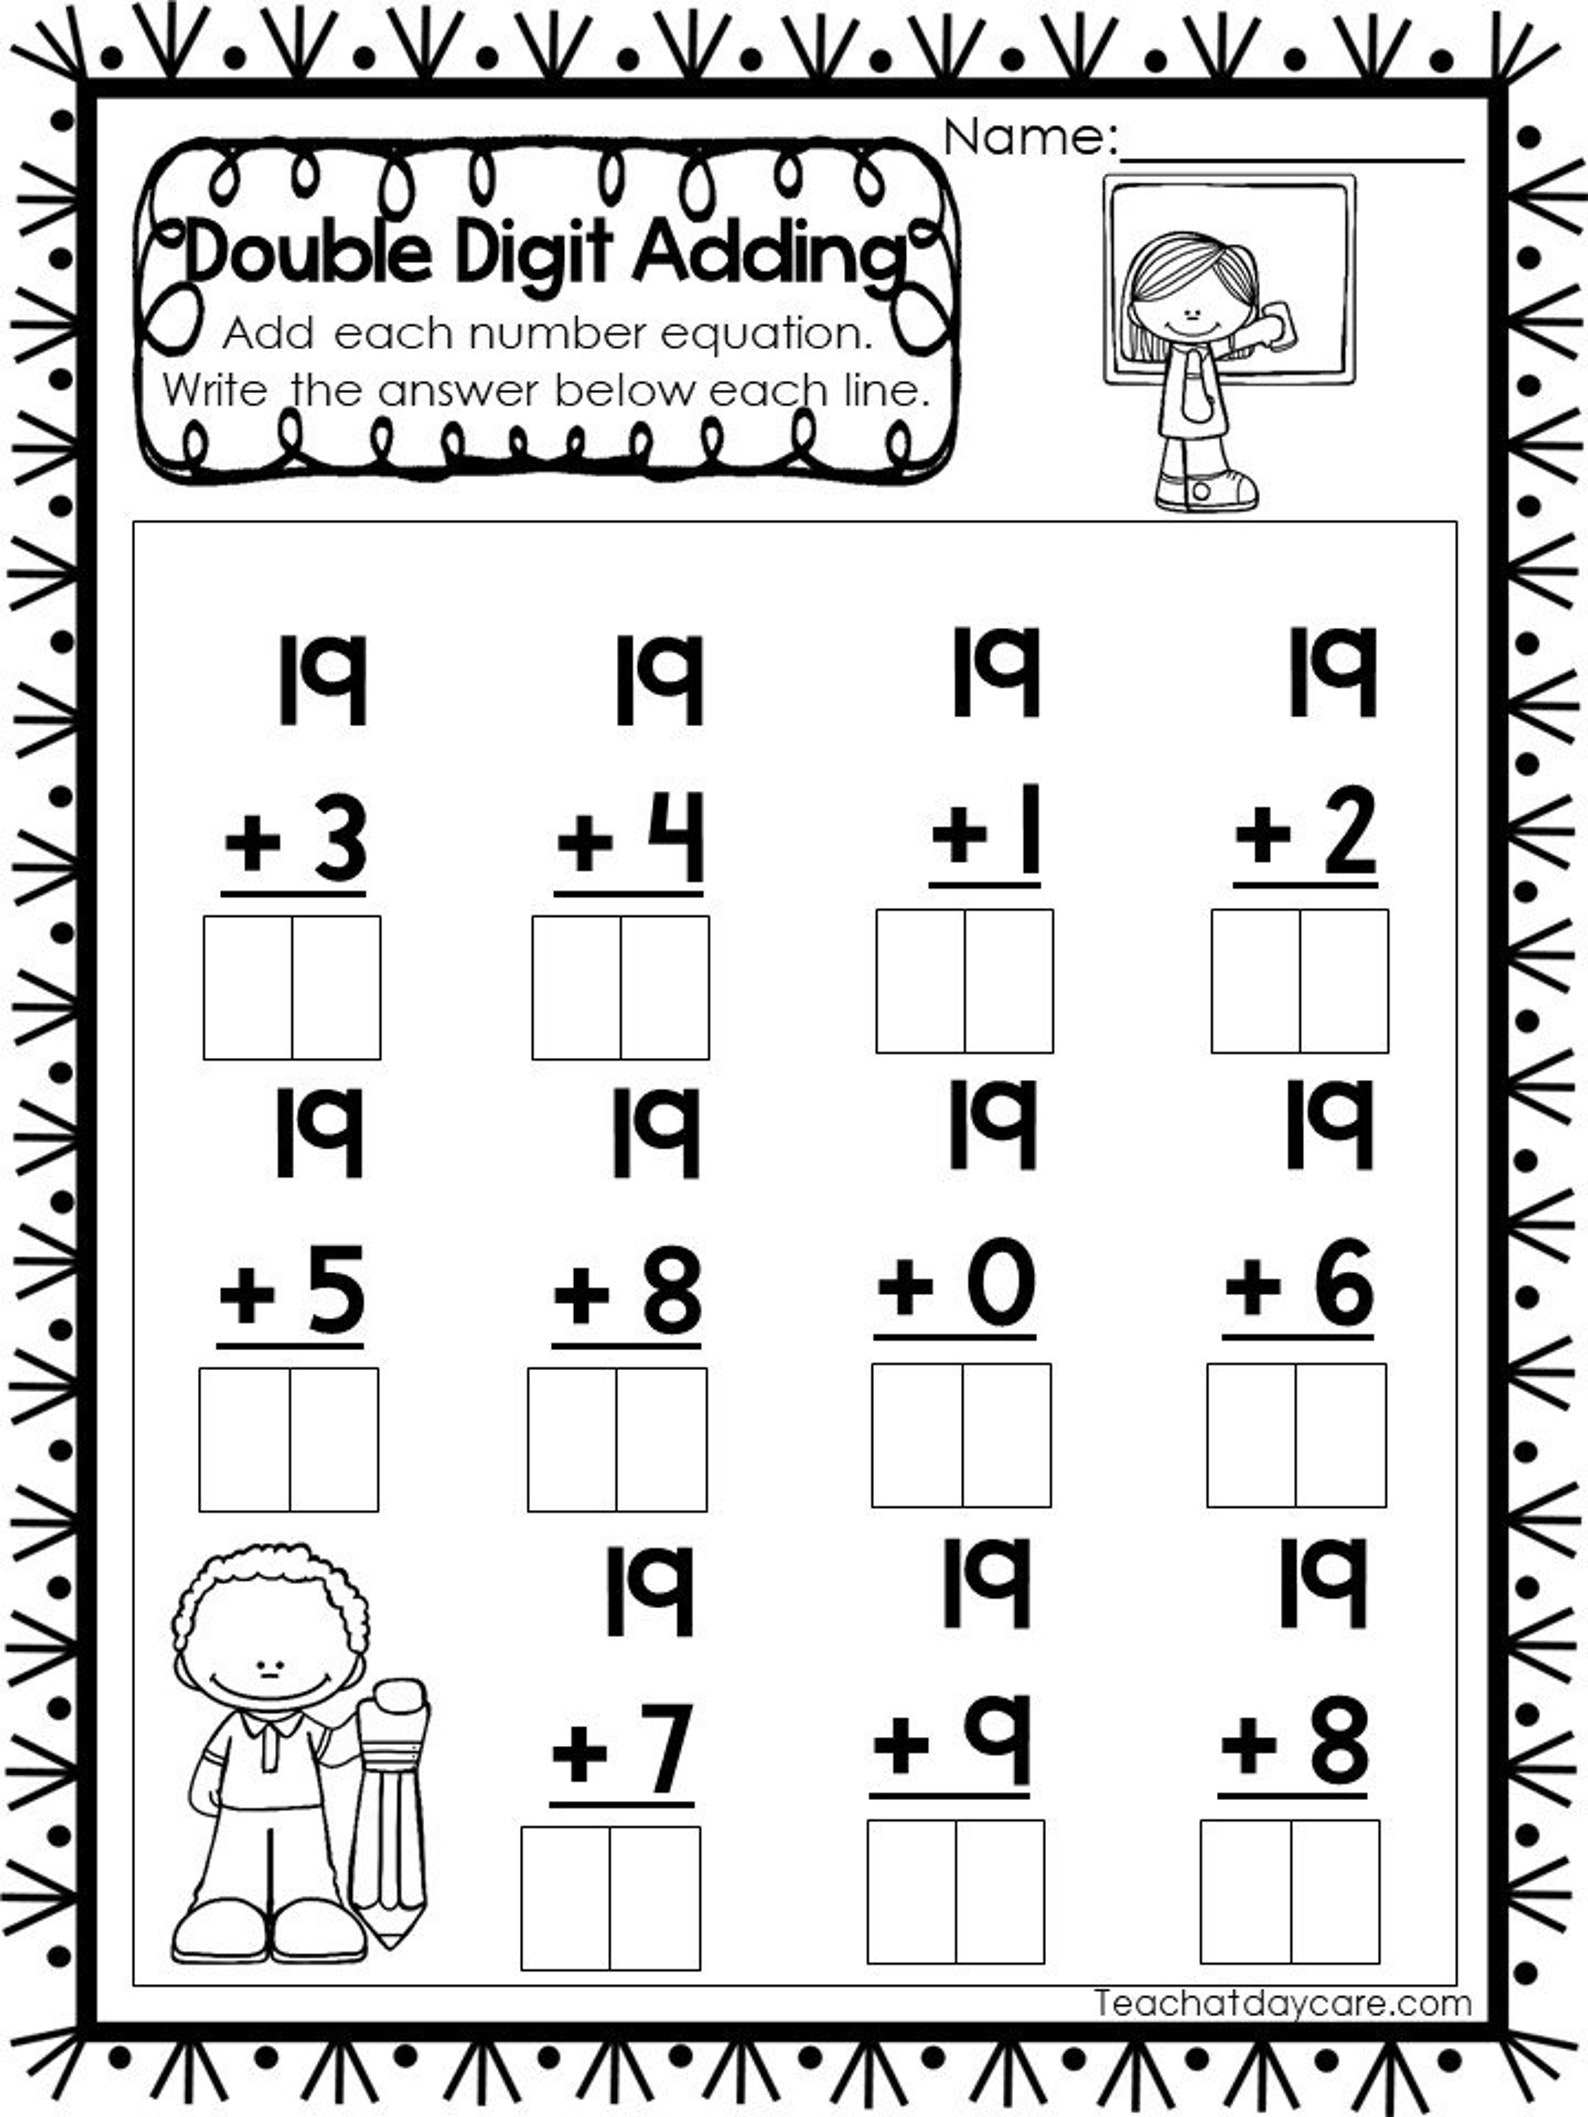 15 Printable Double Digit Addition Worksheets. Numbers 11-20. | Etsy